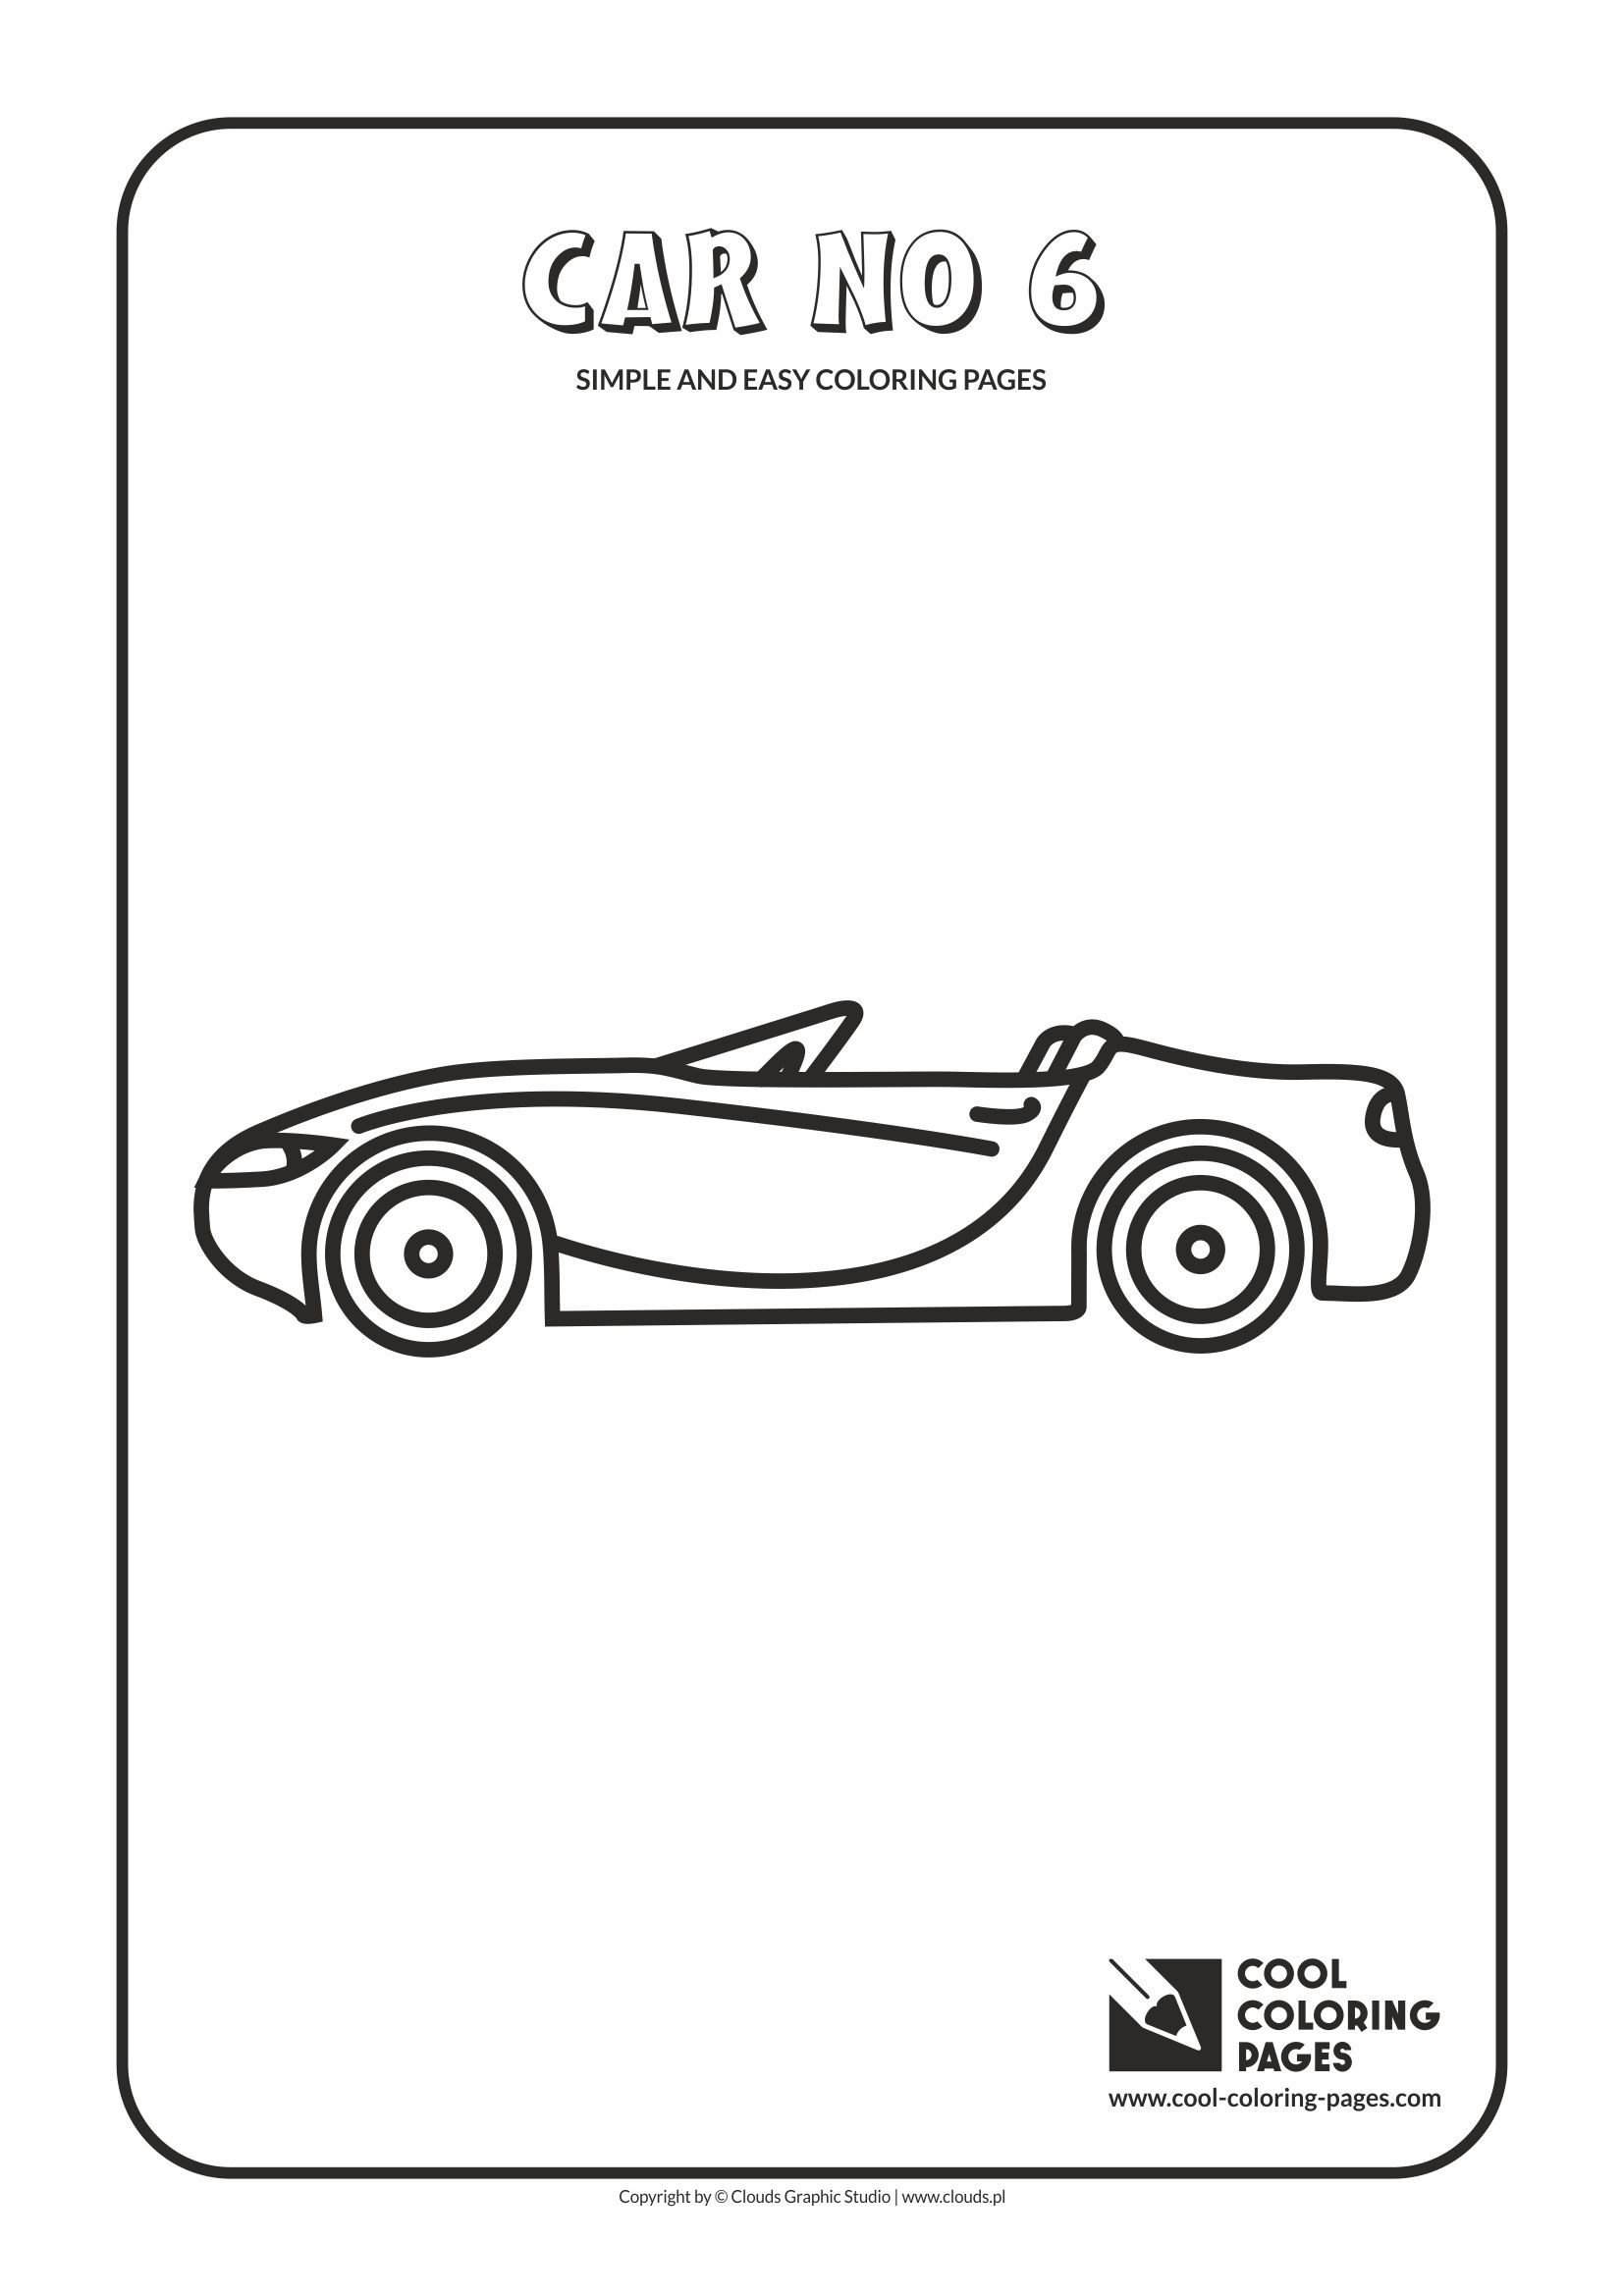 Simple and easy coloring pages for toddlers - Car no 6